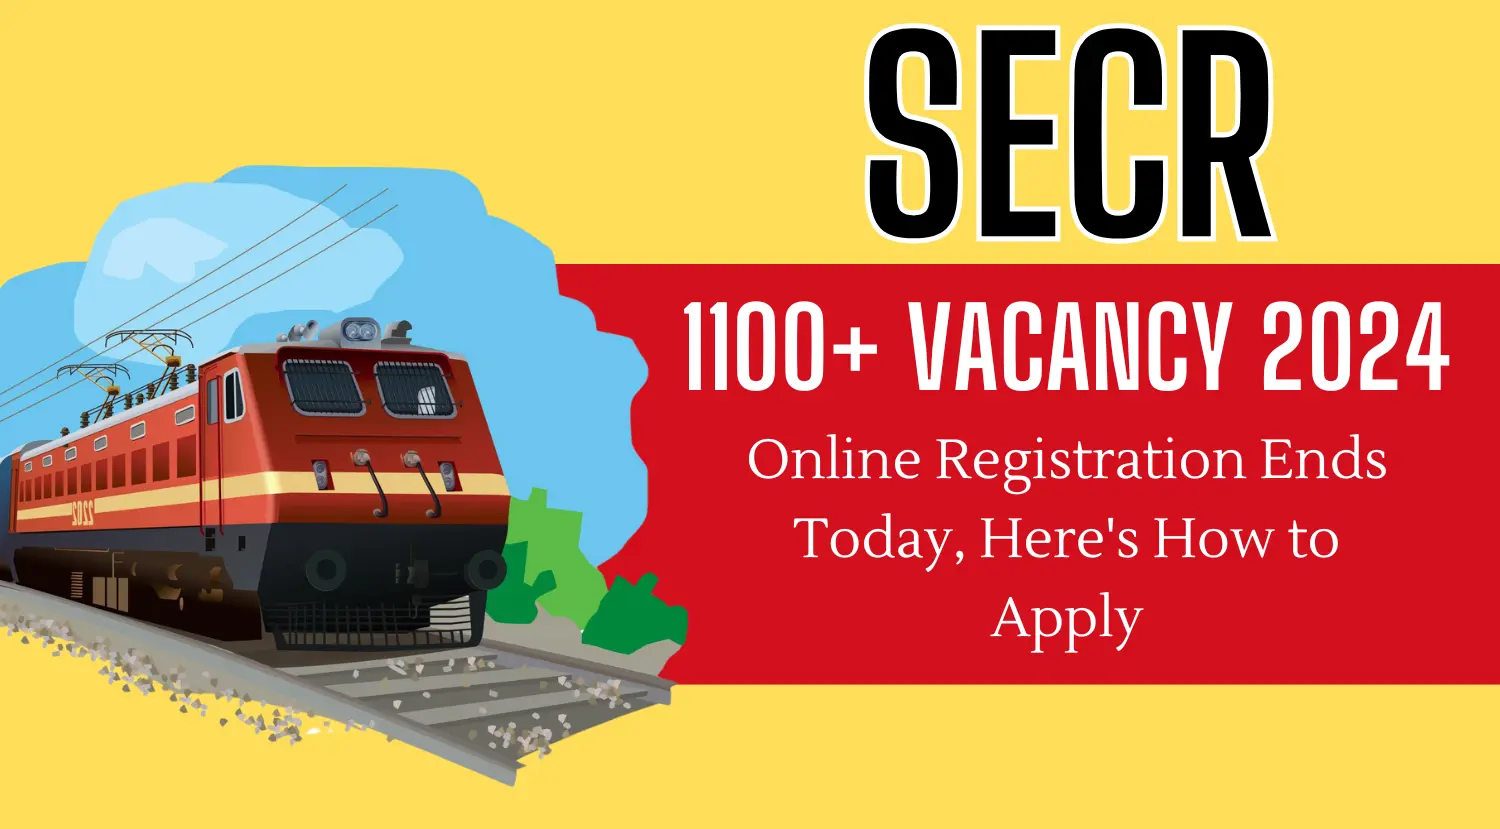 SECR 1100+ Vacancy 2024 Online Registration Ends Today Heres How to Apply